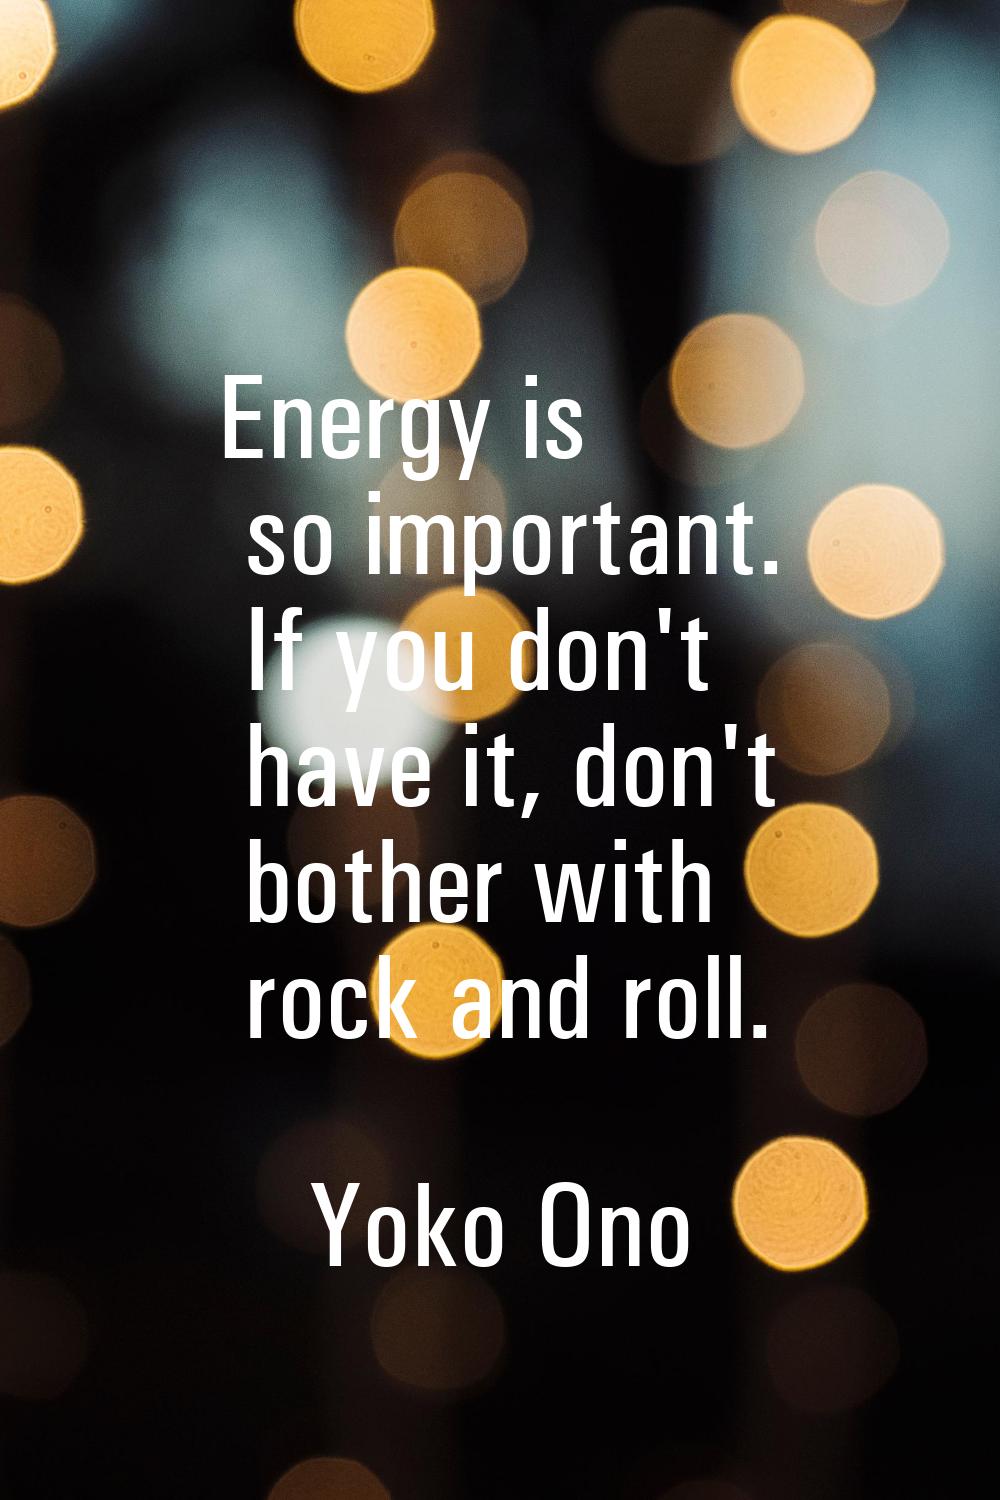 Energy is so important. If you don't have it, don't bother with rock and roll.